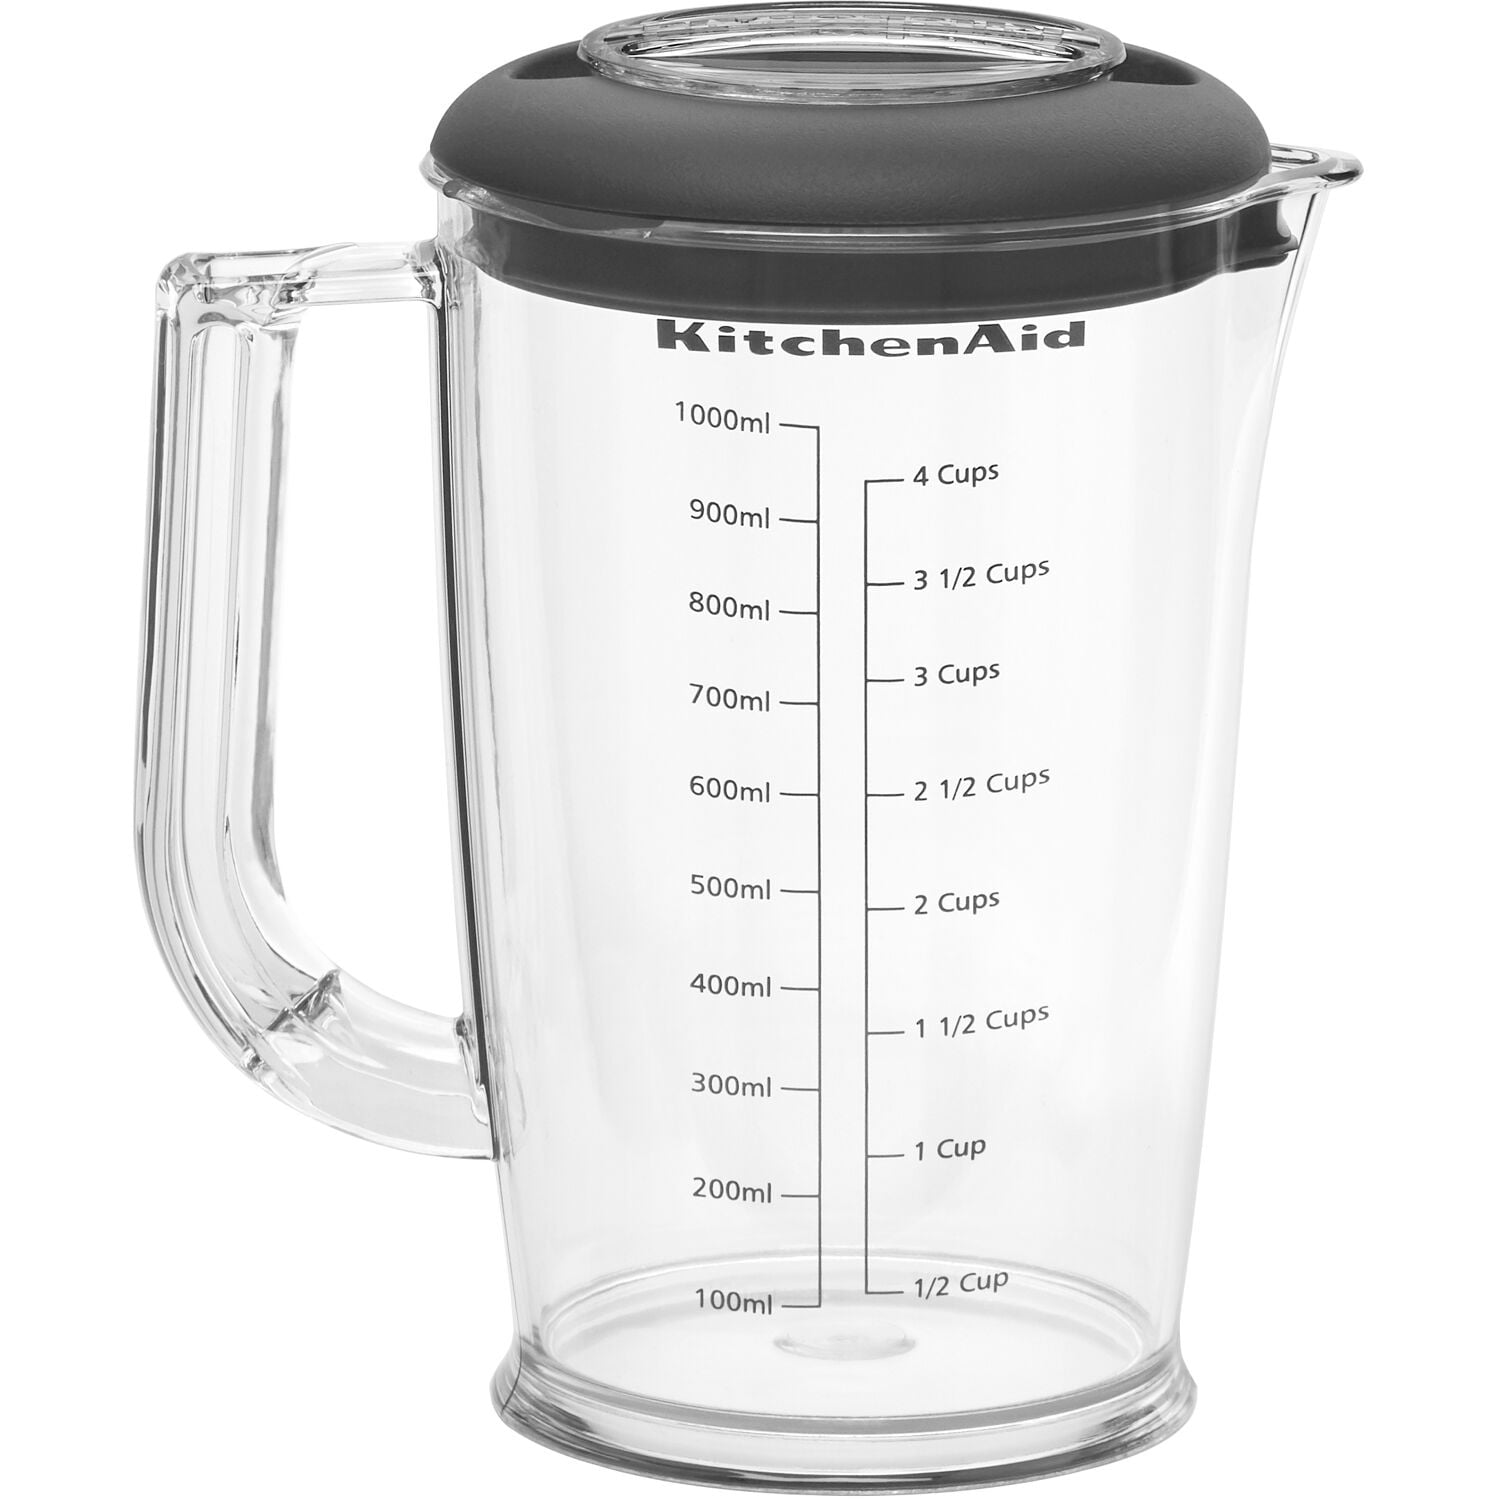  KitchenAid Cordless Variable Speed Hand Blender with